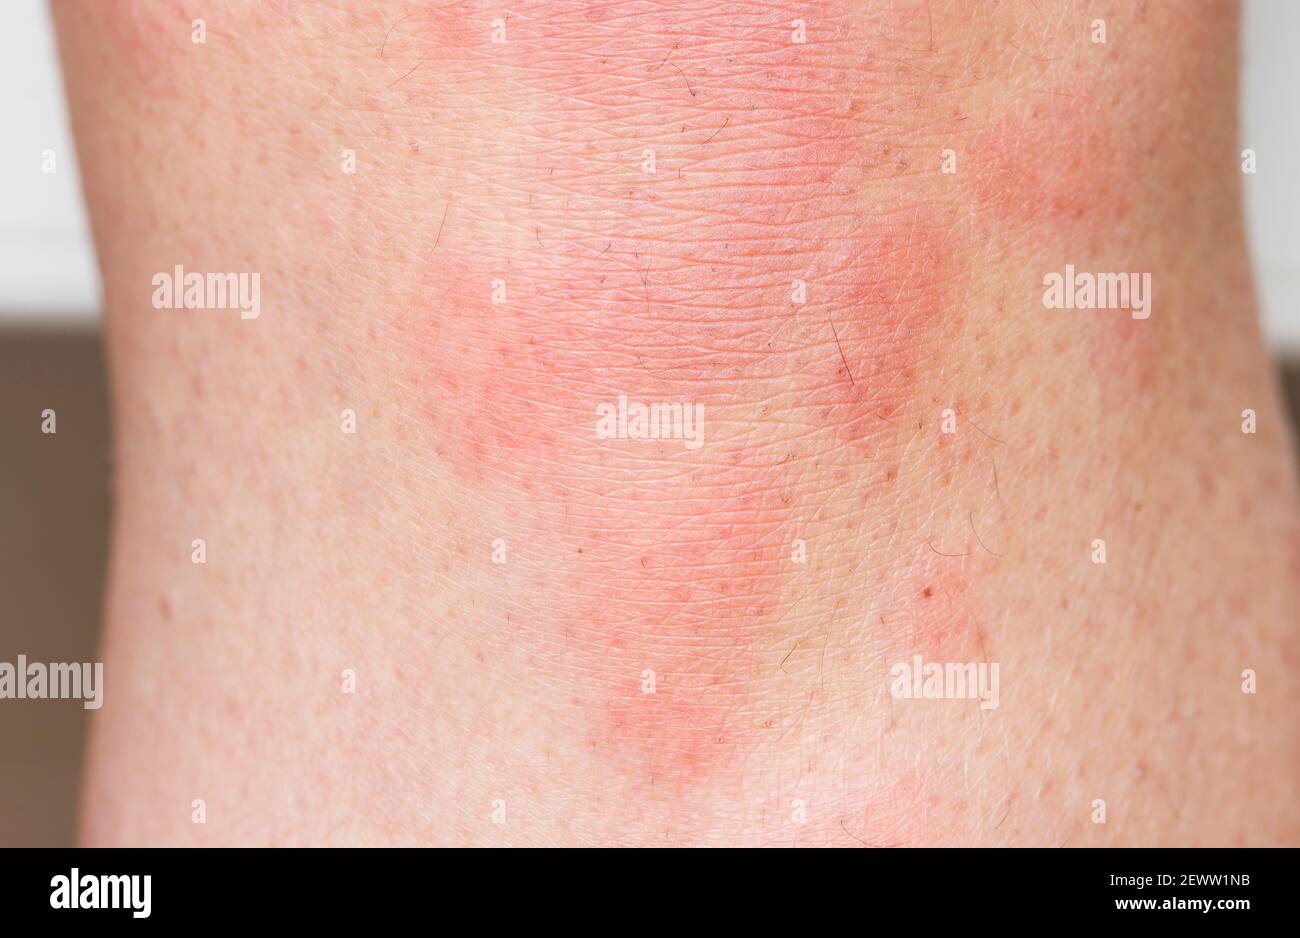 Hives on skin, red urticaria rash on a woman's body. Depicts skin allergies or skin infections, UK Stock Photo